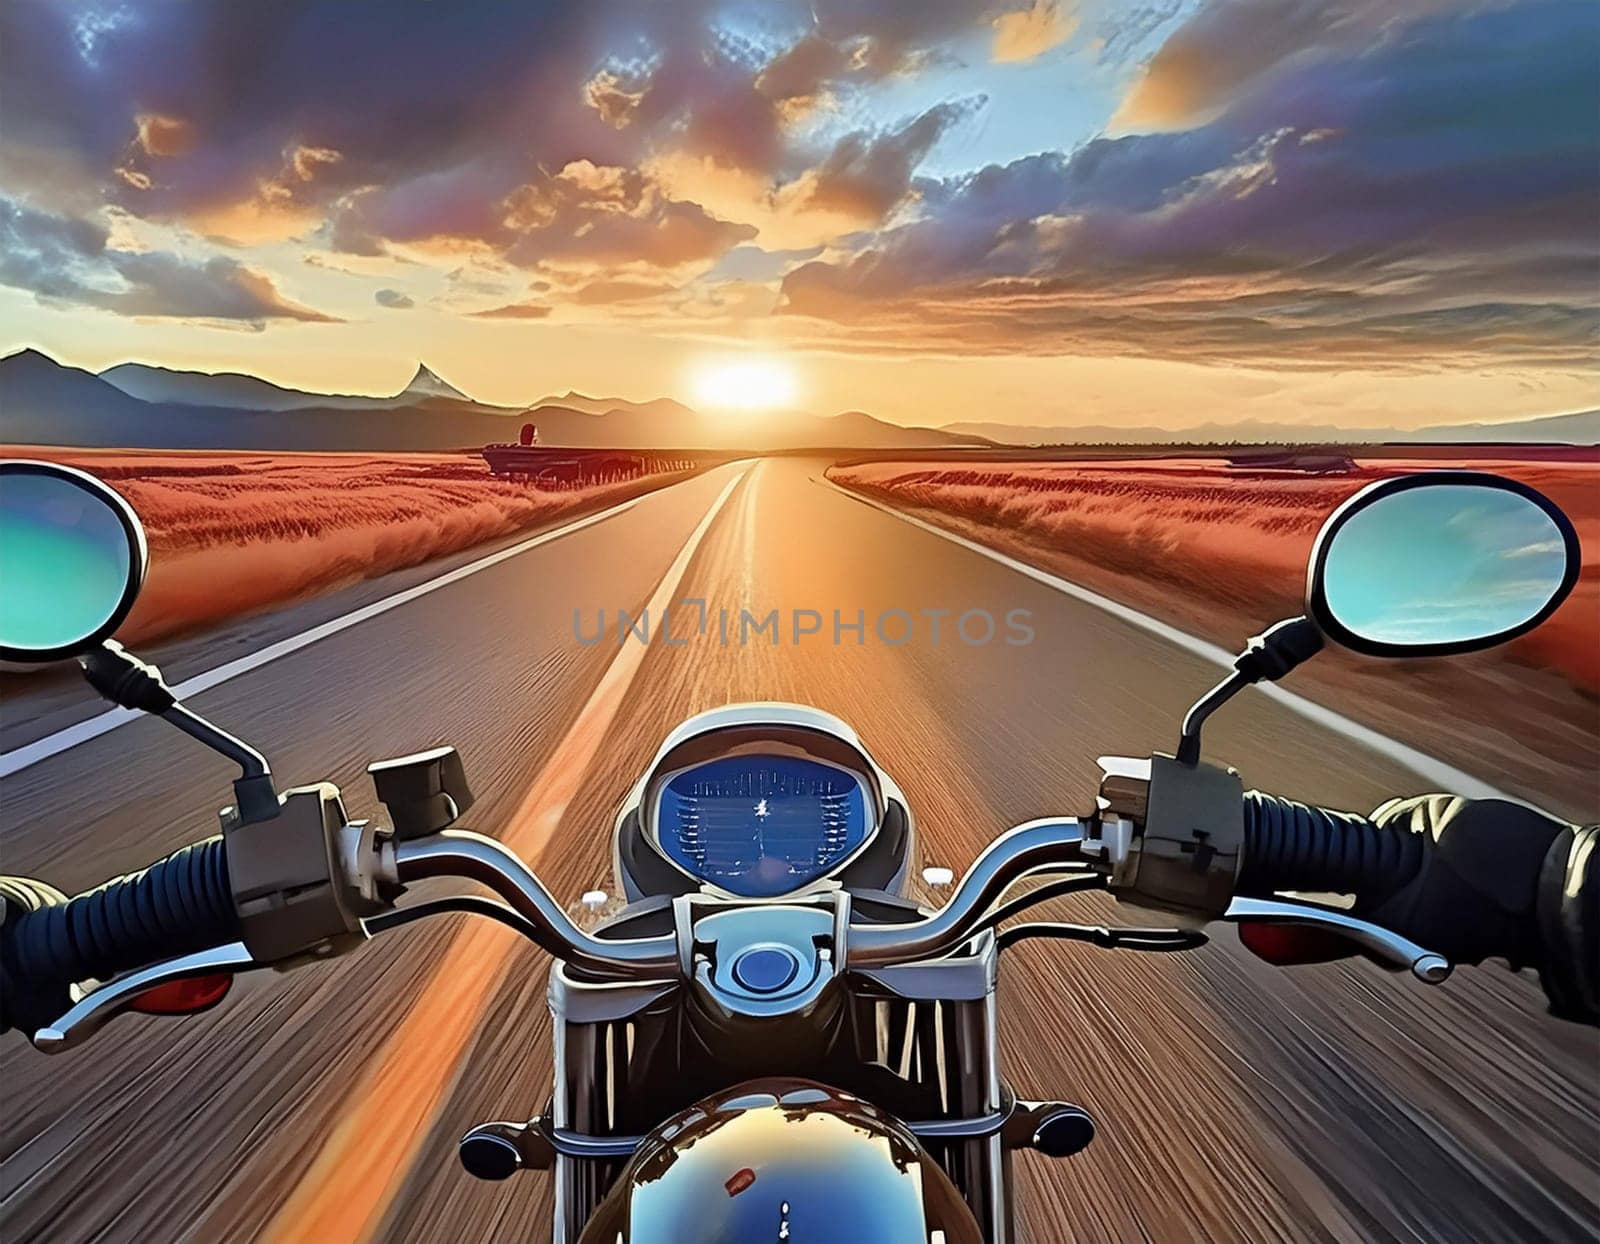 Riding a motorcycle on the street. Have fun driving along empty roads on a motorcycle tour. Copyspace for your individual text.